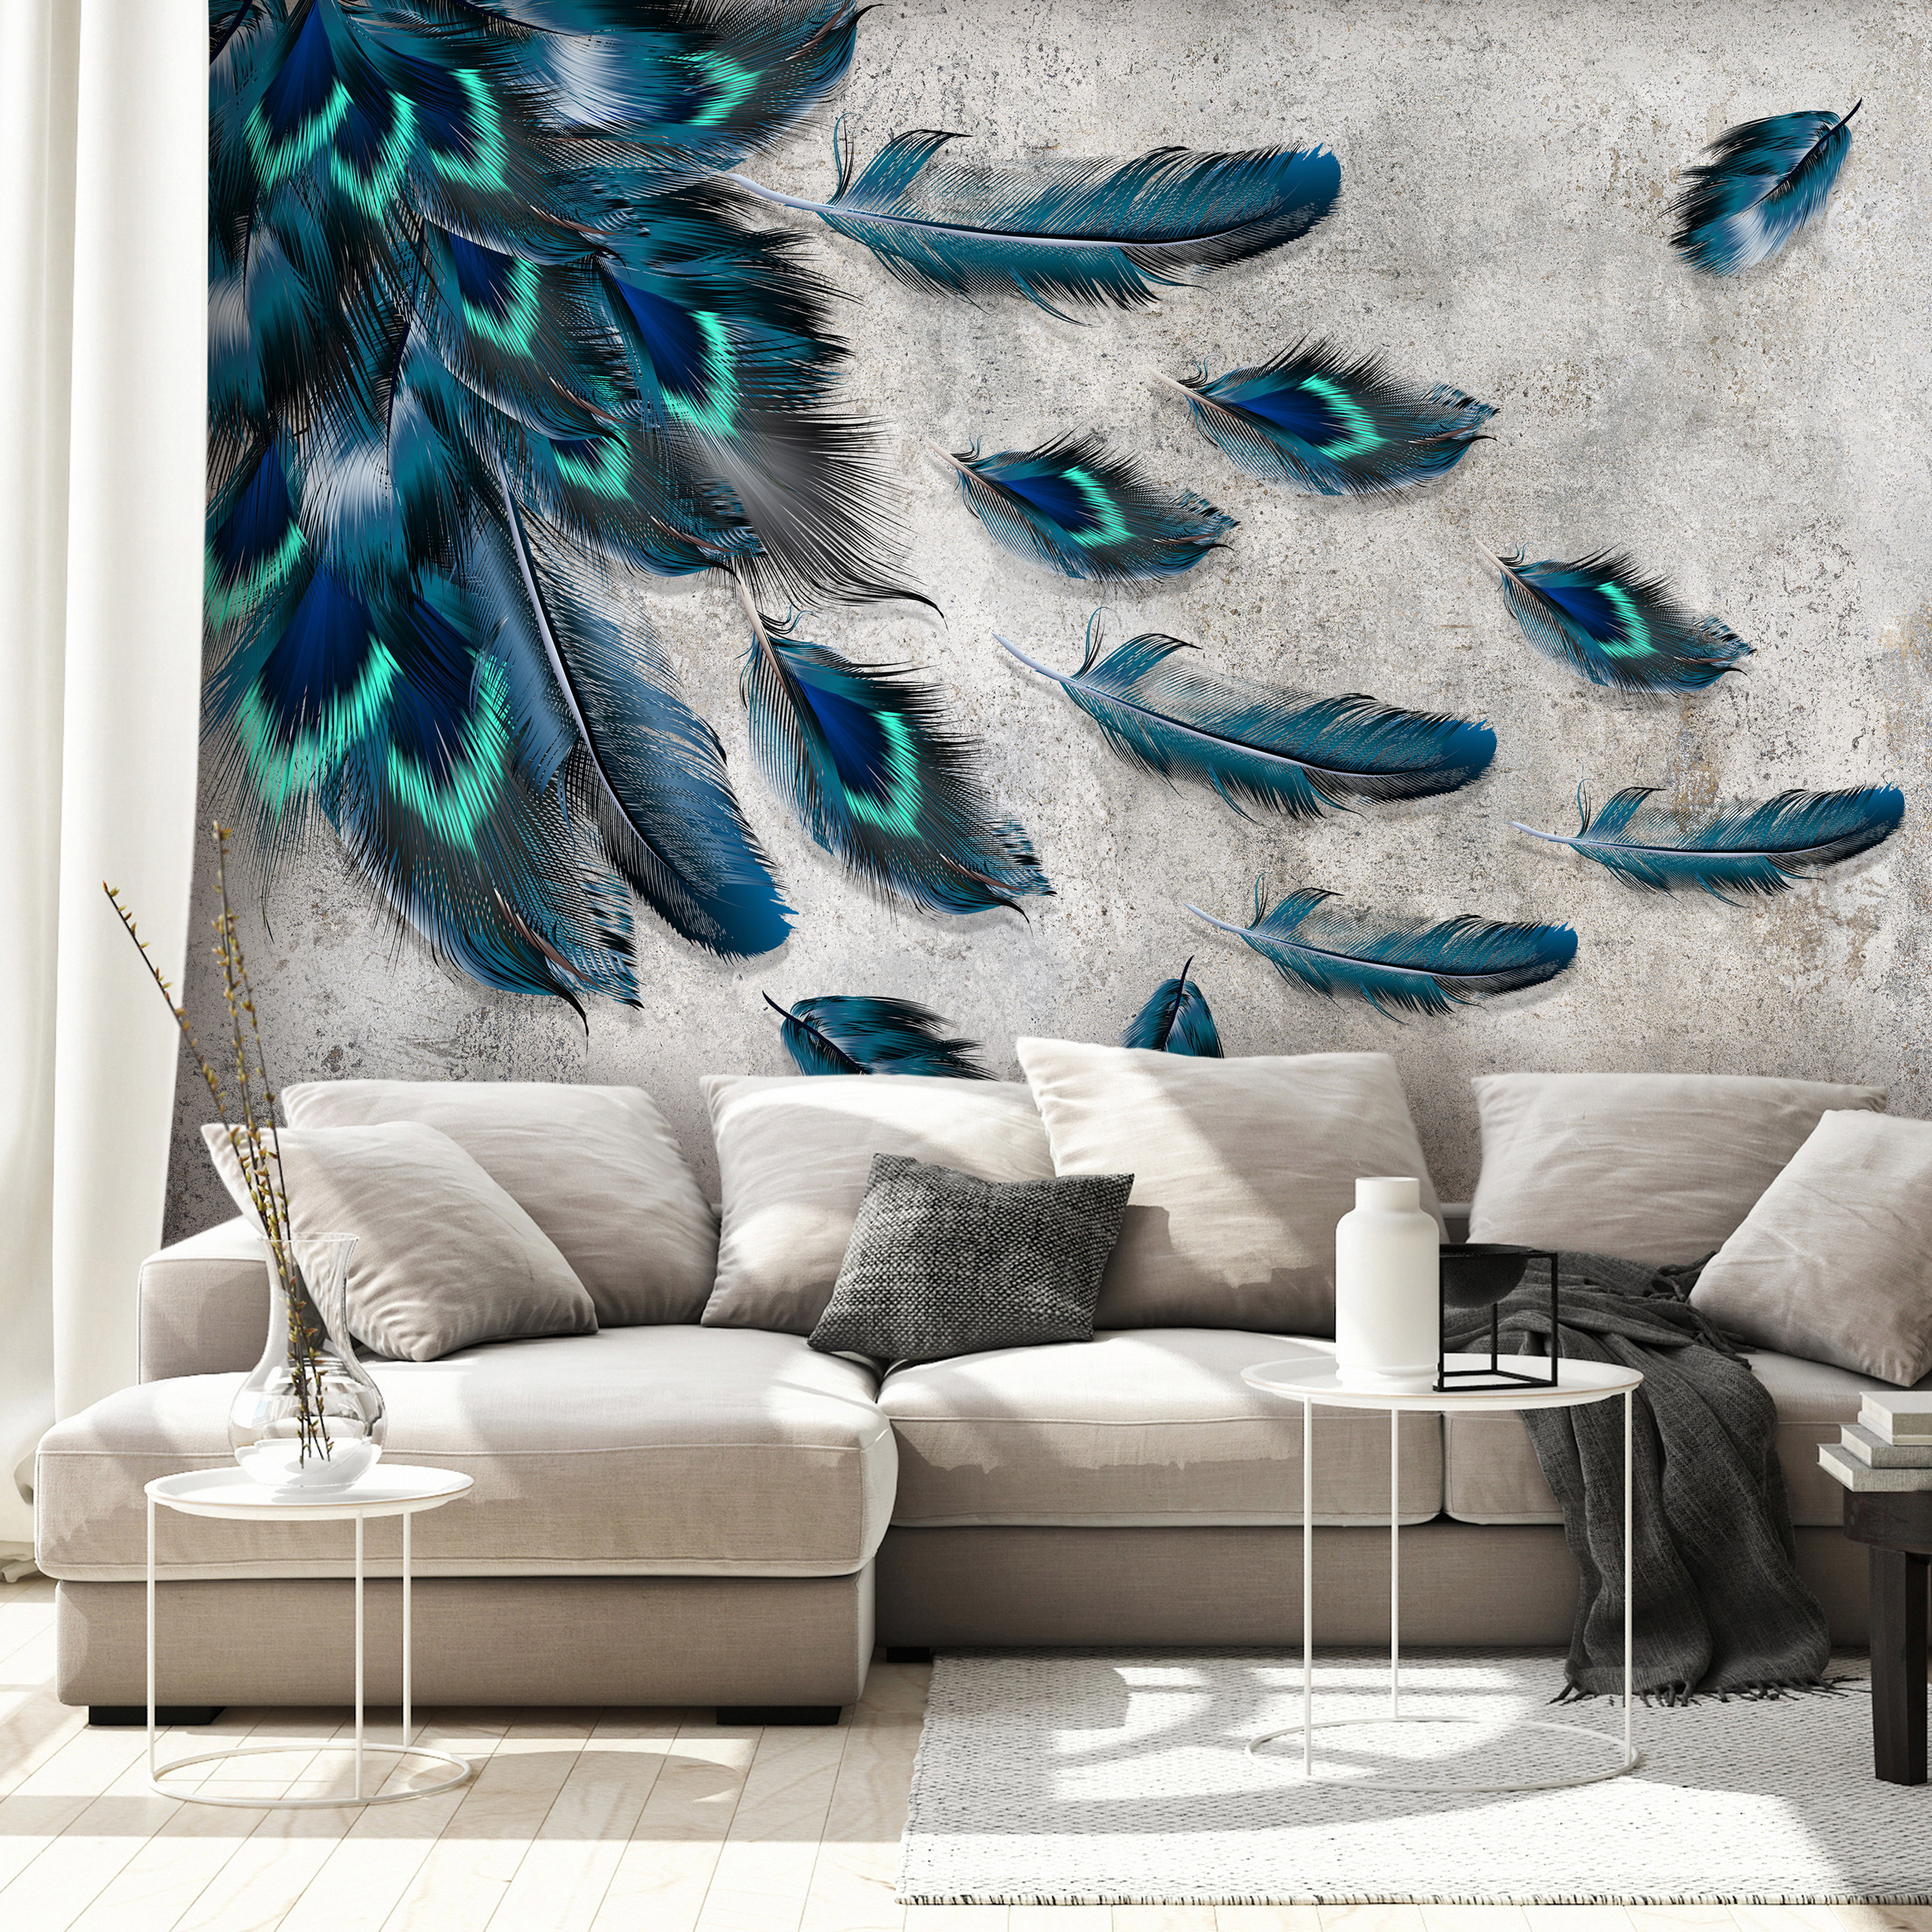 Self-adhesive Wallpaper - Blown Feathers - 441x315